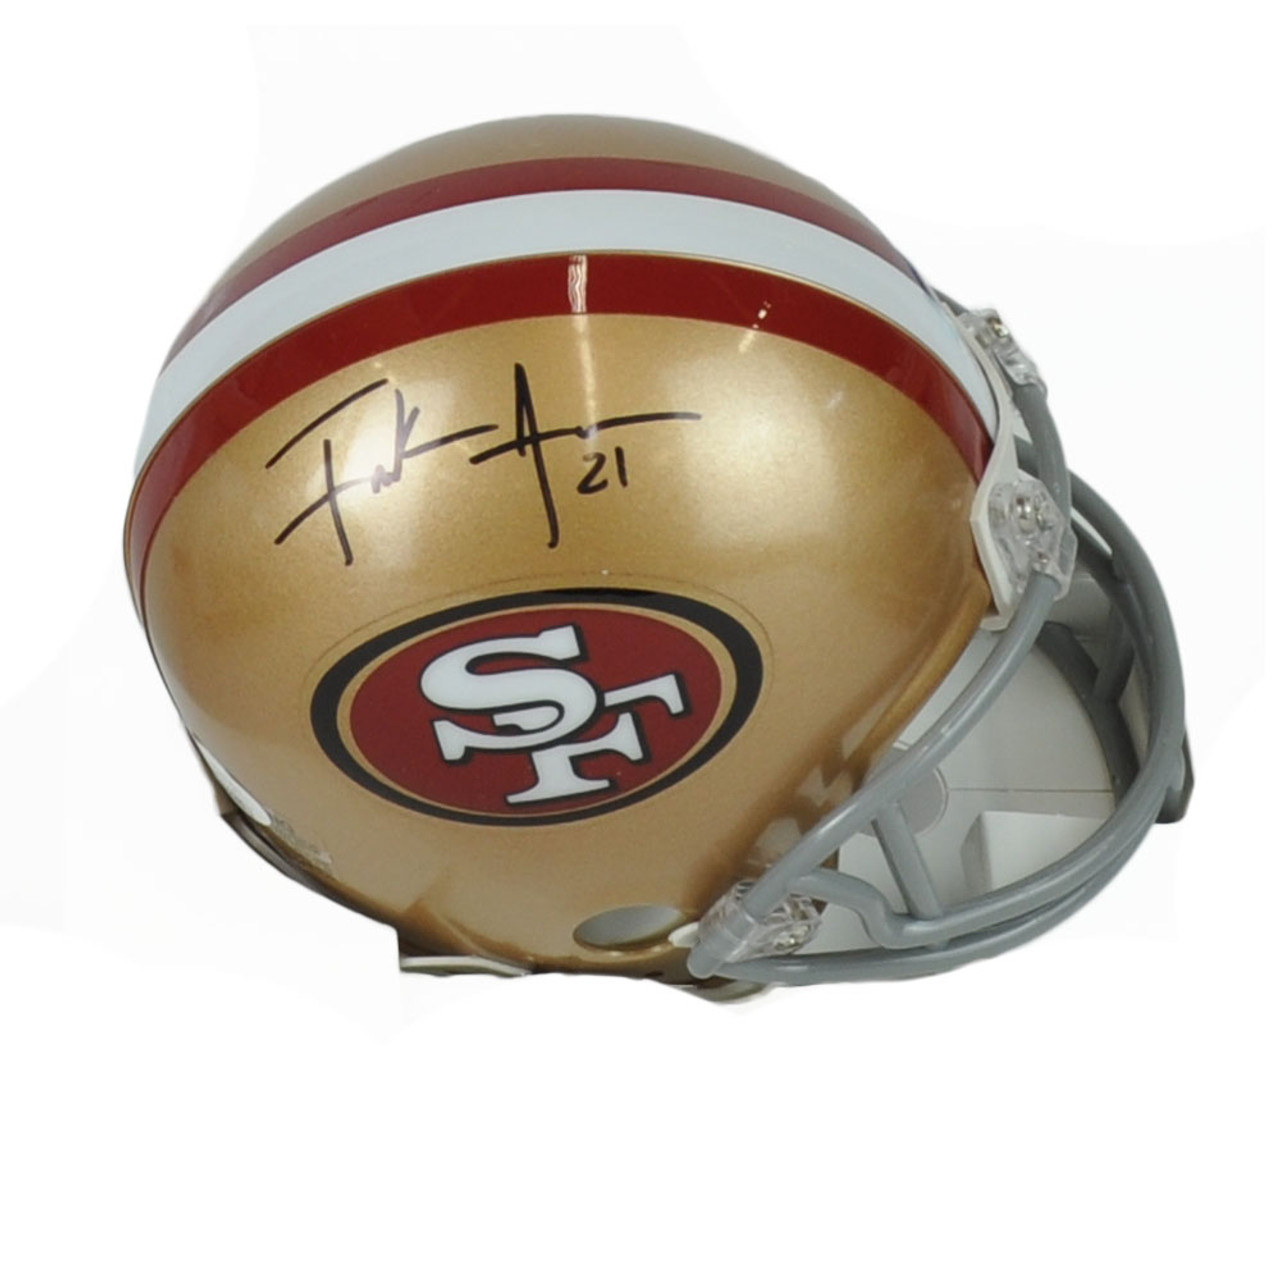 Authentic Autographed Sports Memorabilia - Signed Jerseys, Signed Photos,  Signed Helmets, Signed Balls